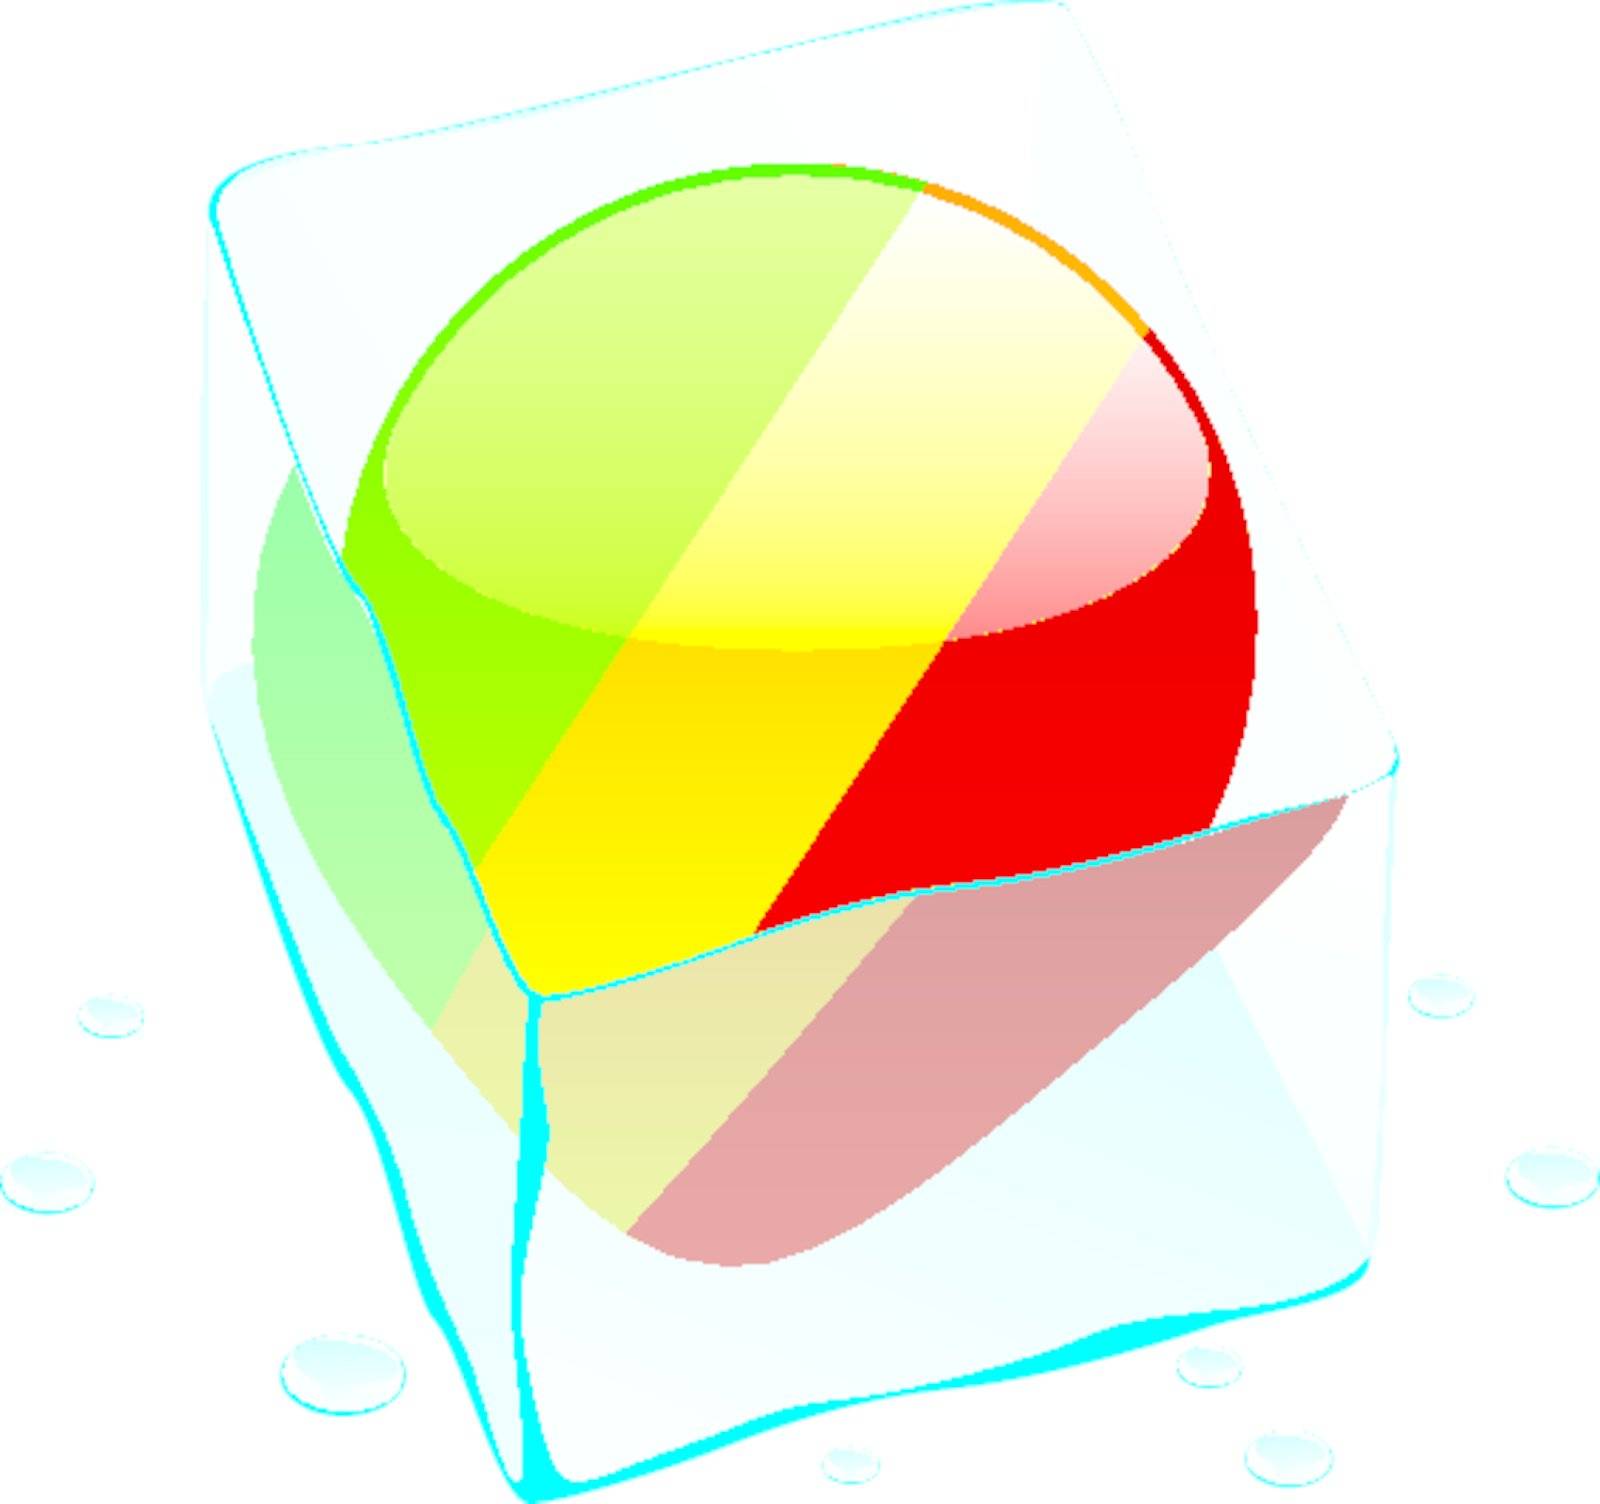 fully editable vector illustration of congo button flag frozen in ice cube